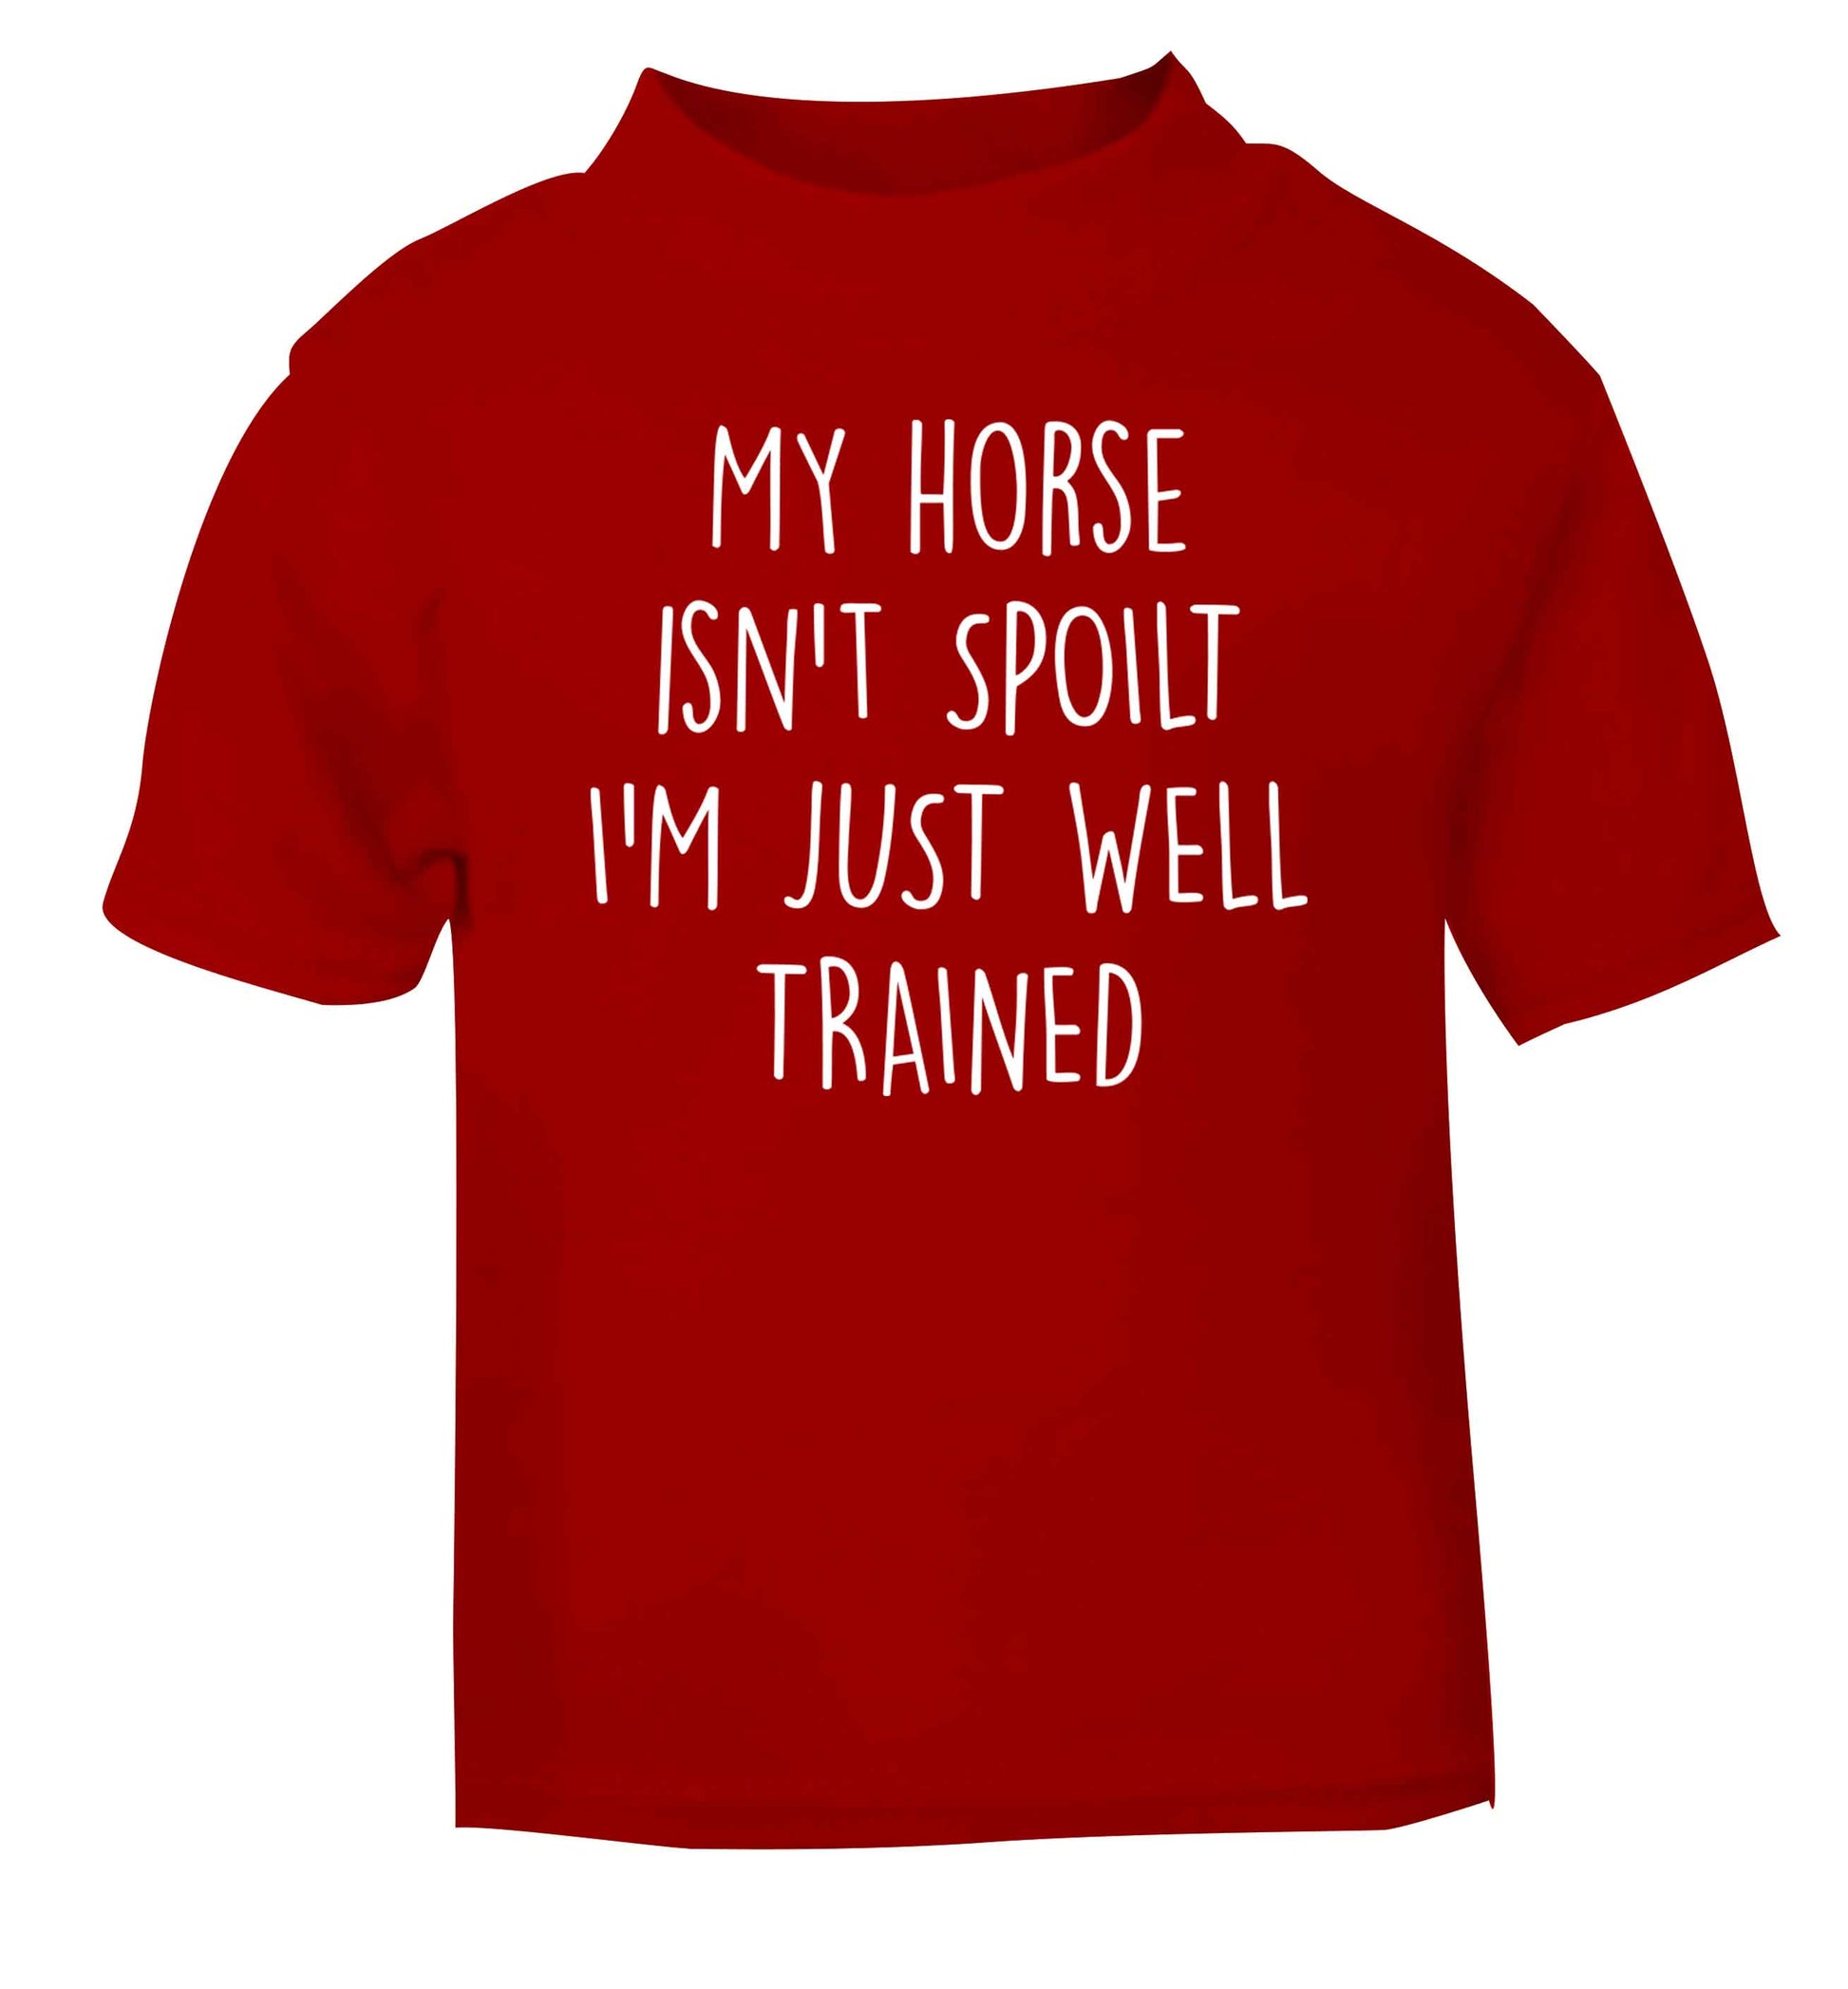 My horse isn't spoilt I'm just well trained red baby toddler Tshirt 2 Years